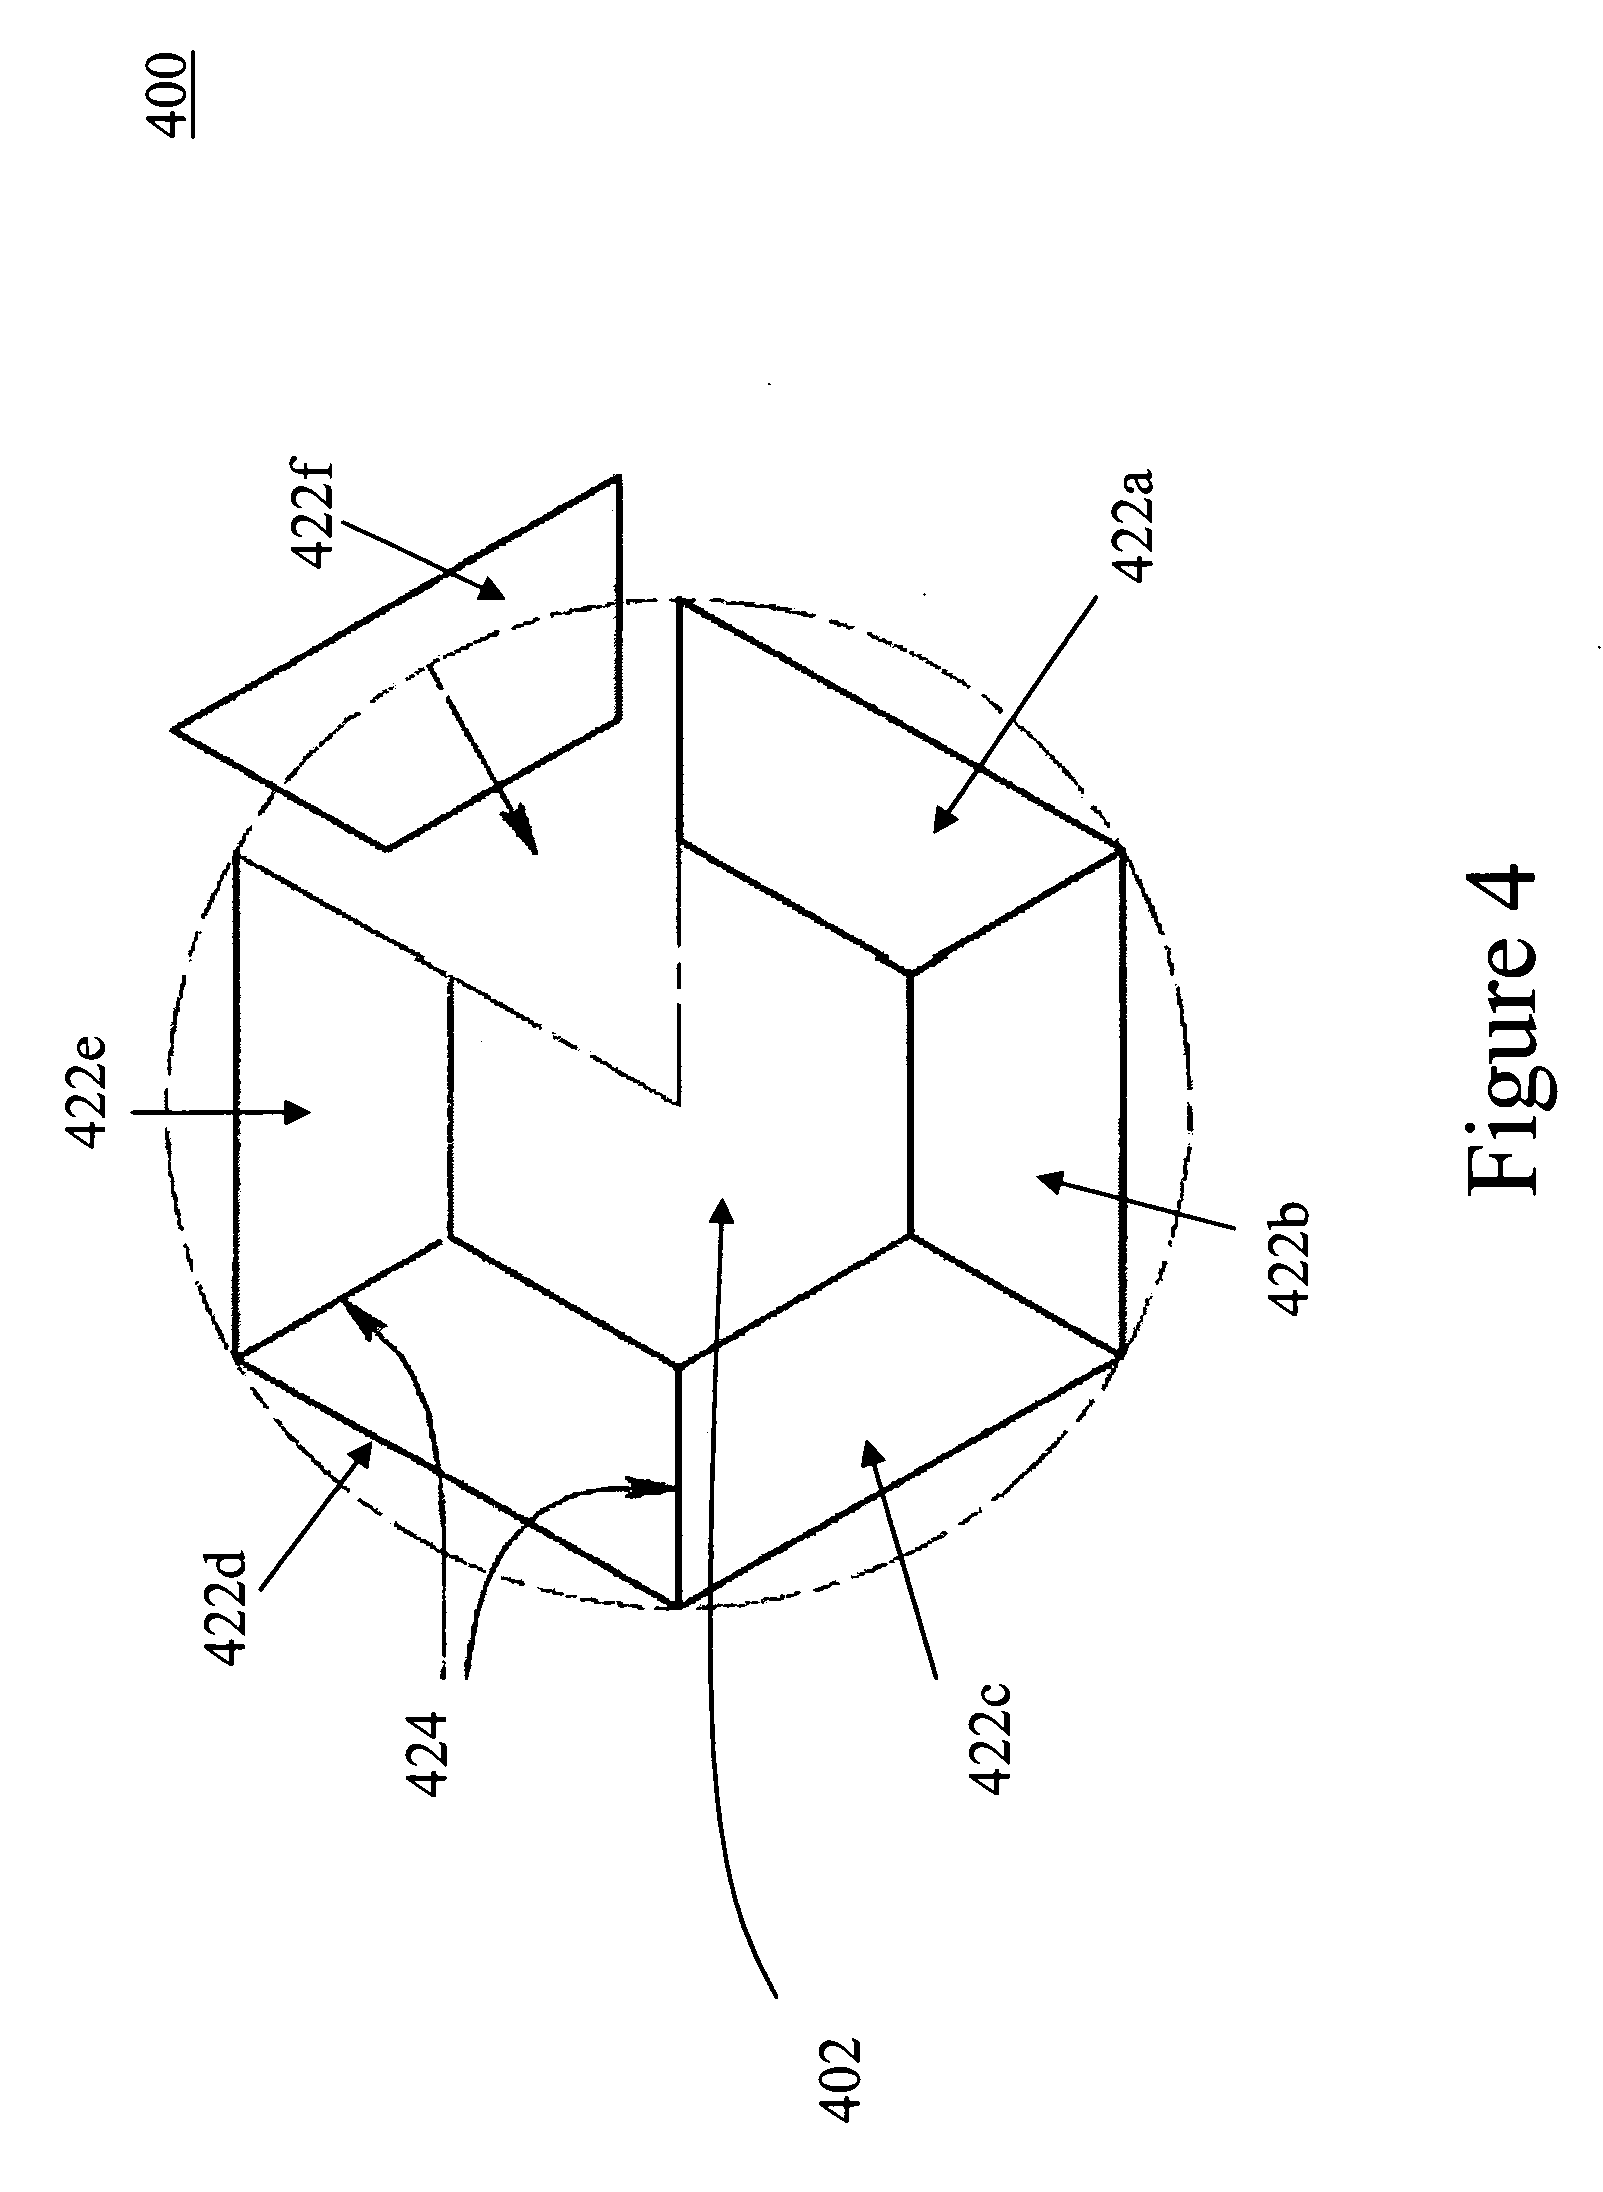 Methods of constructing a betatron vacuum chamber and injector